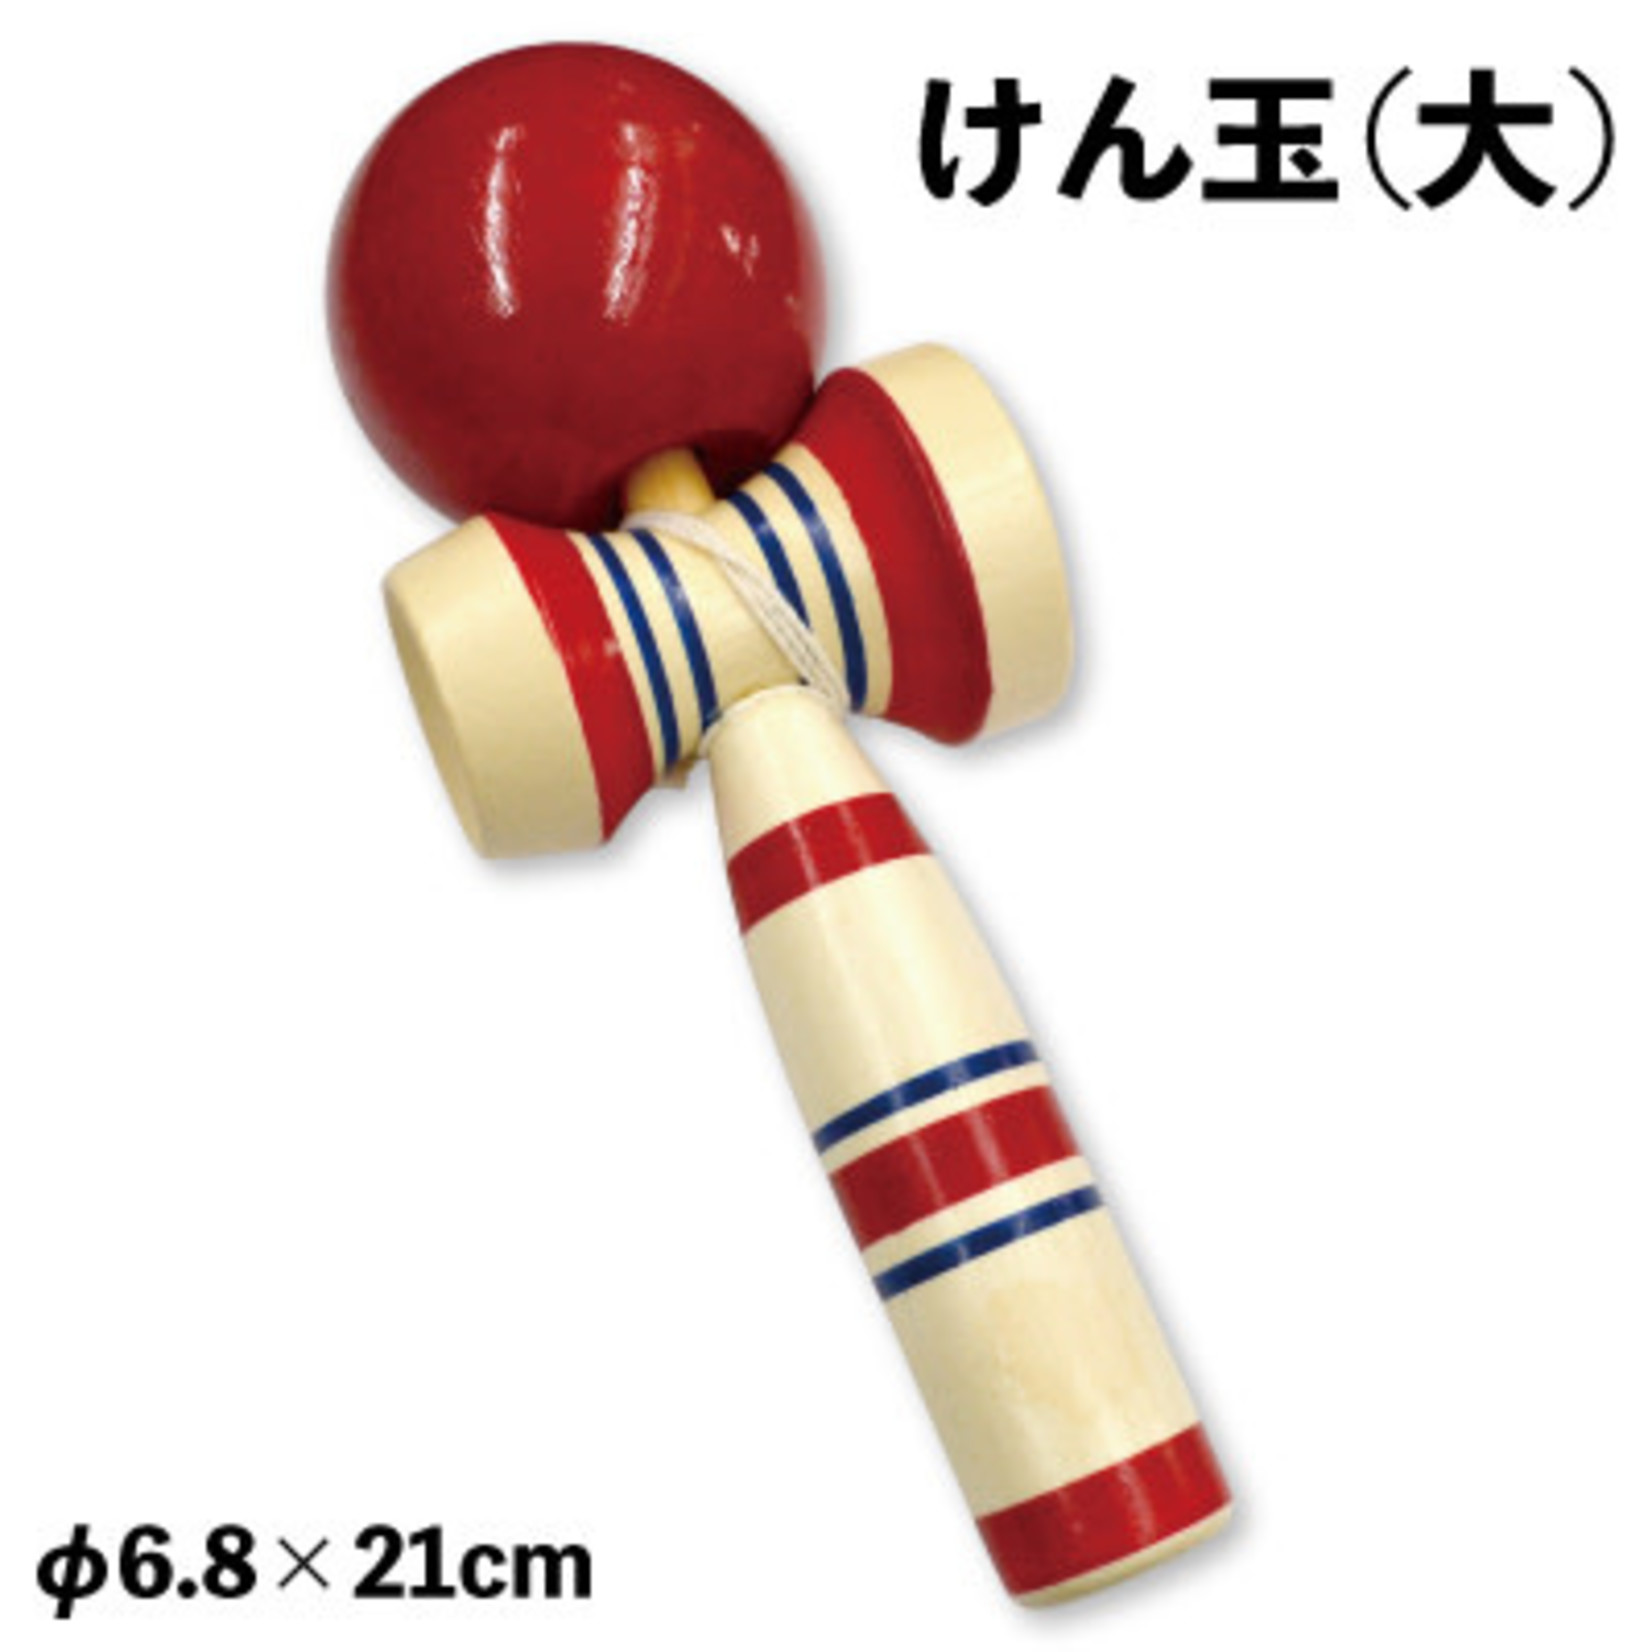 Kendama (Cup & Ball Toy) - 8.25"